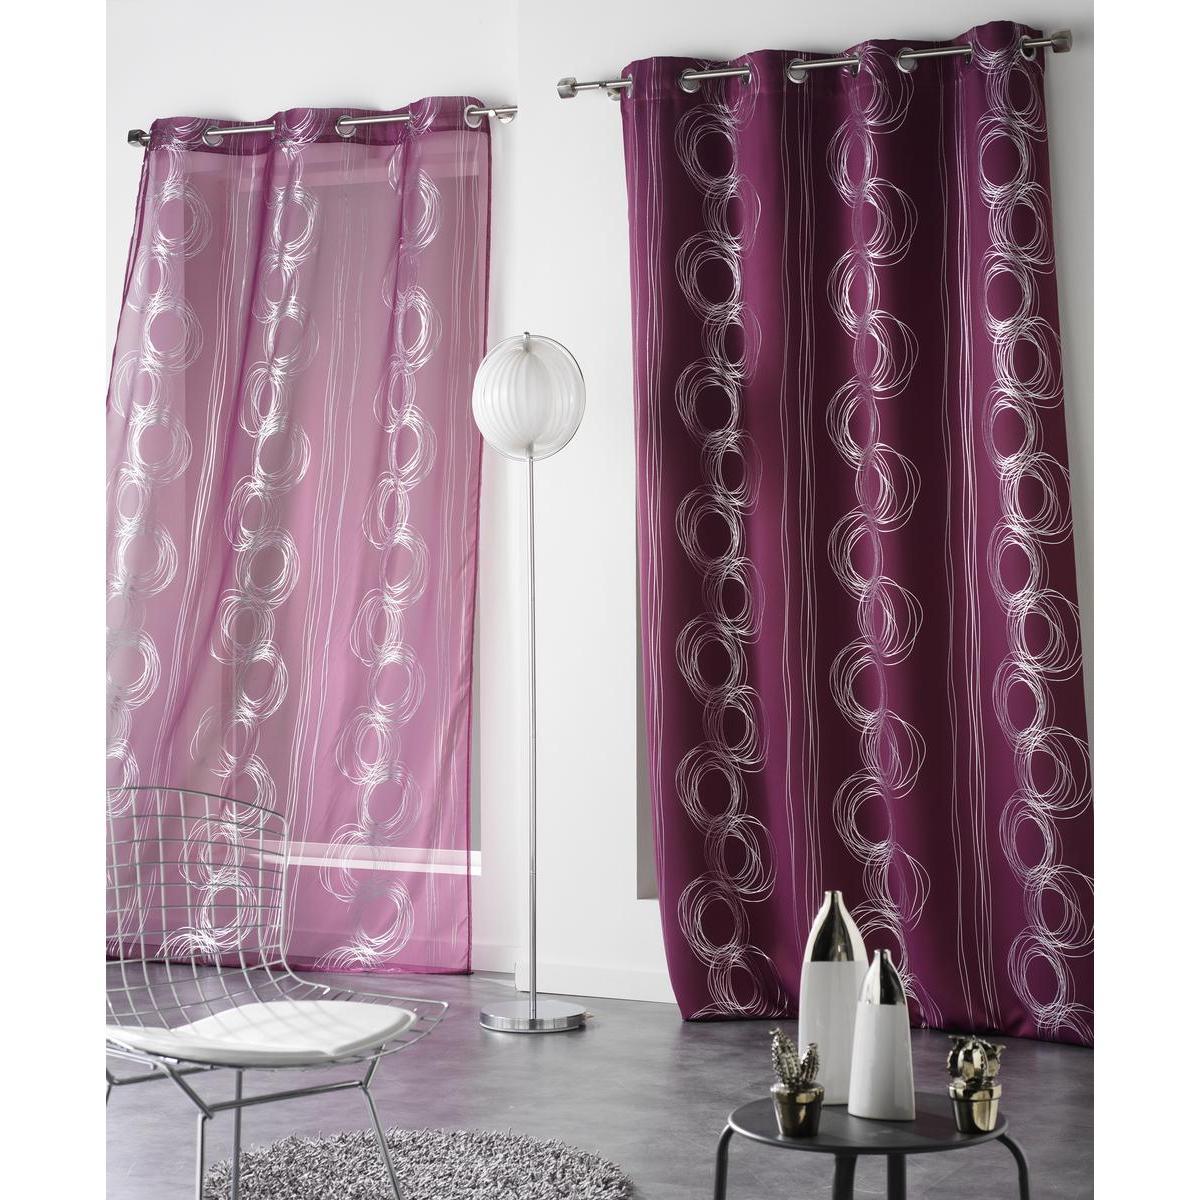 Rideau occultant - 100 % polyester - 140 x 240 cm - Violet